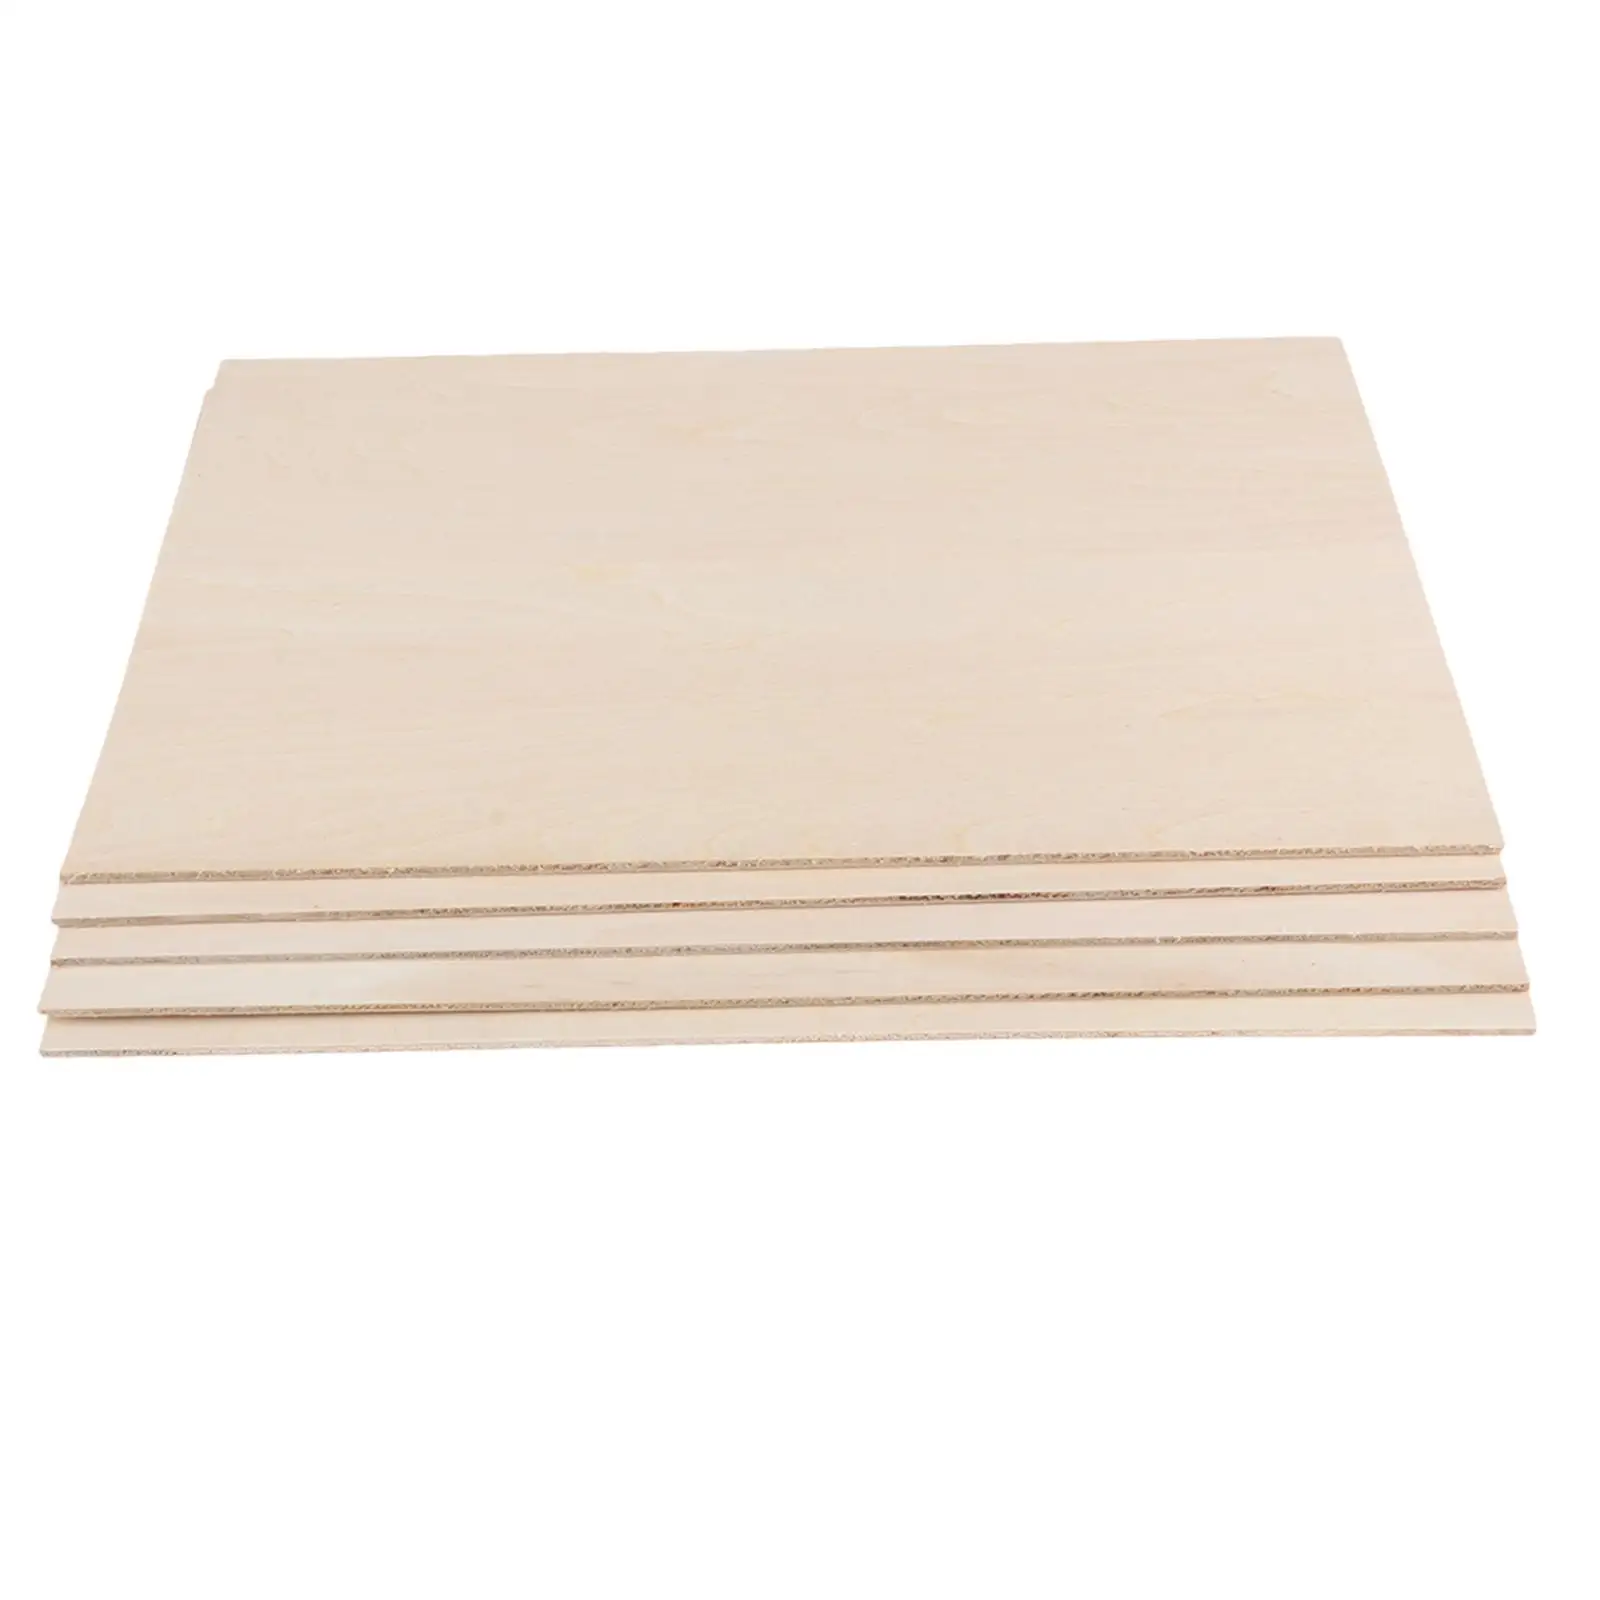 10Pcs Thin Plywood Board Wood Sheets Board Unfinished Wood 200x200x2mm for DIY Project Crafts Miniature Aircraft Sailboat Models